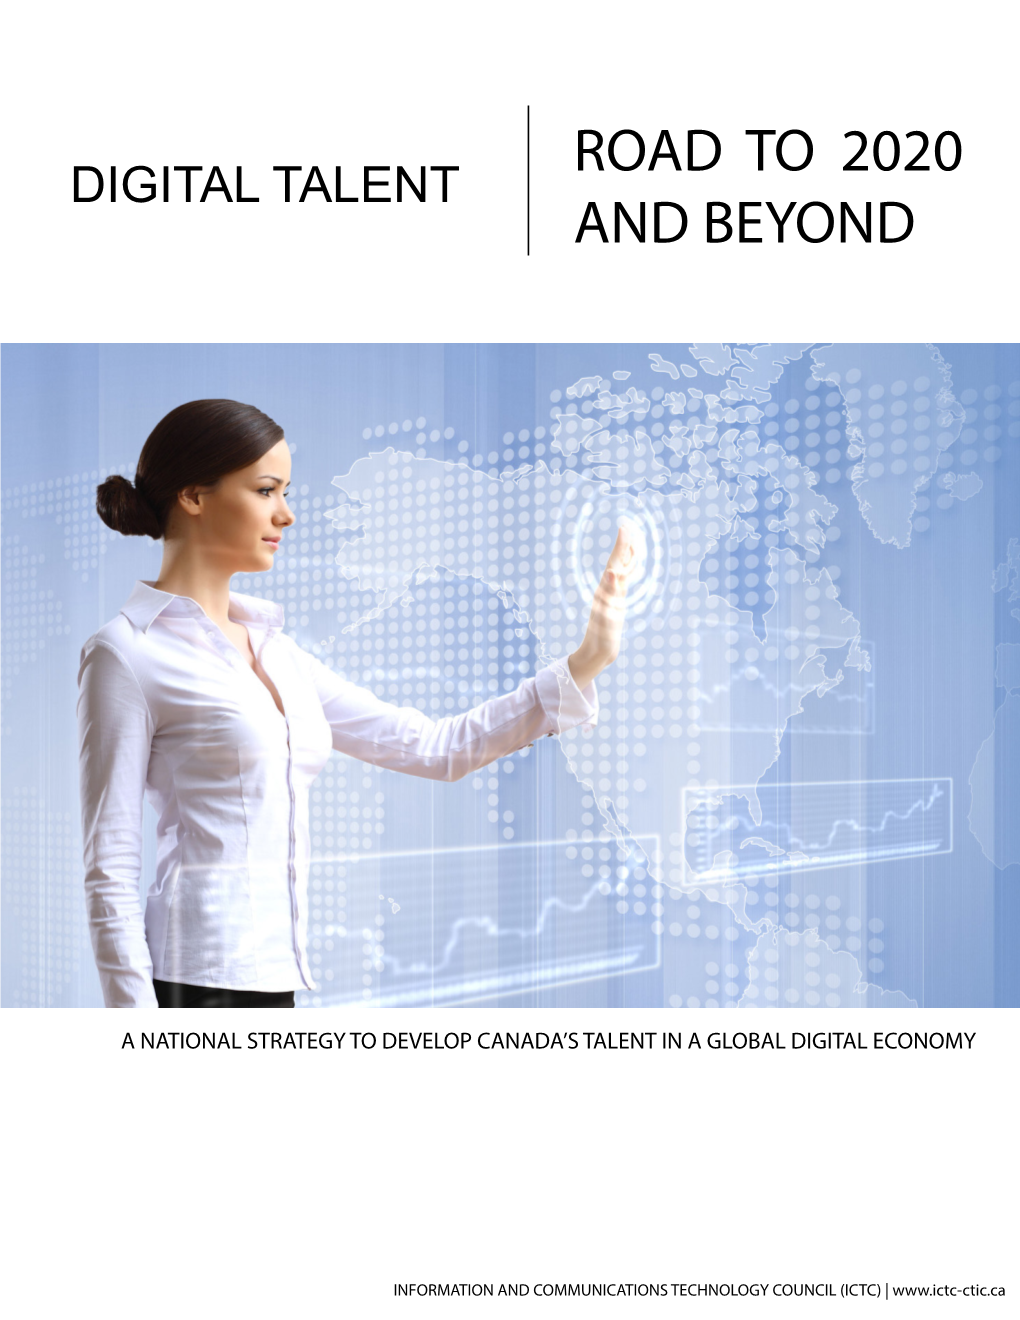 Digital Talent: Road to 2020 and Beyond Is Canada’S First National Digital Talent Strategy